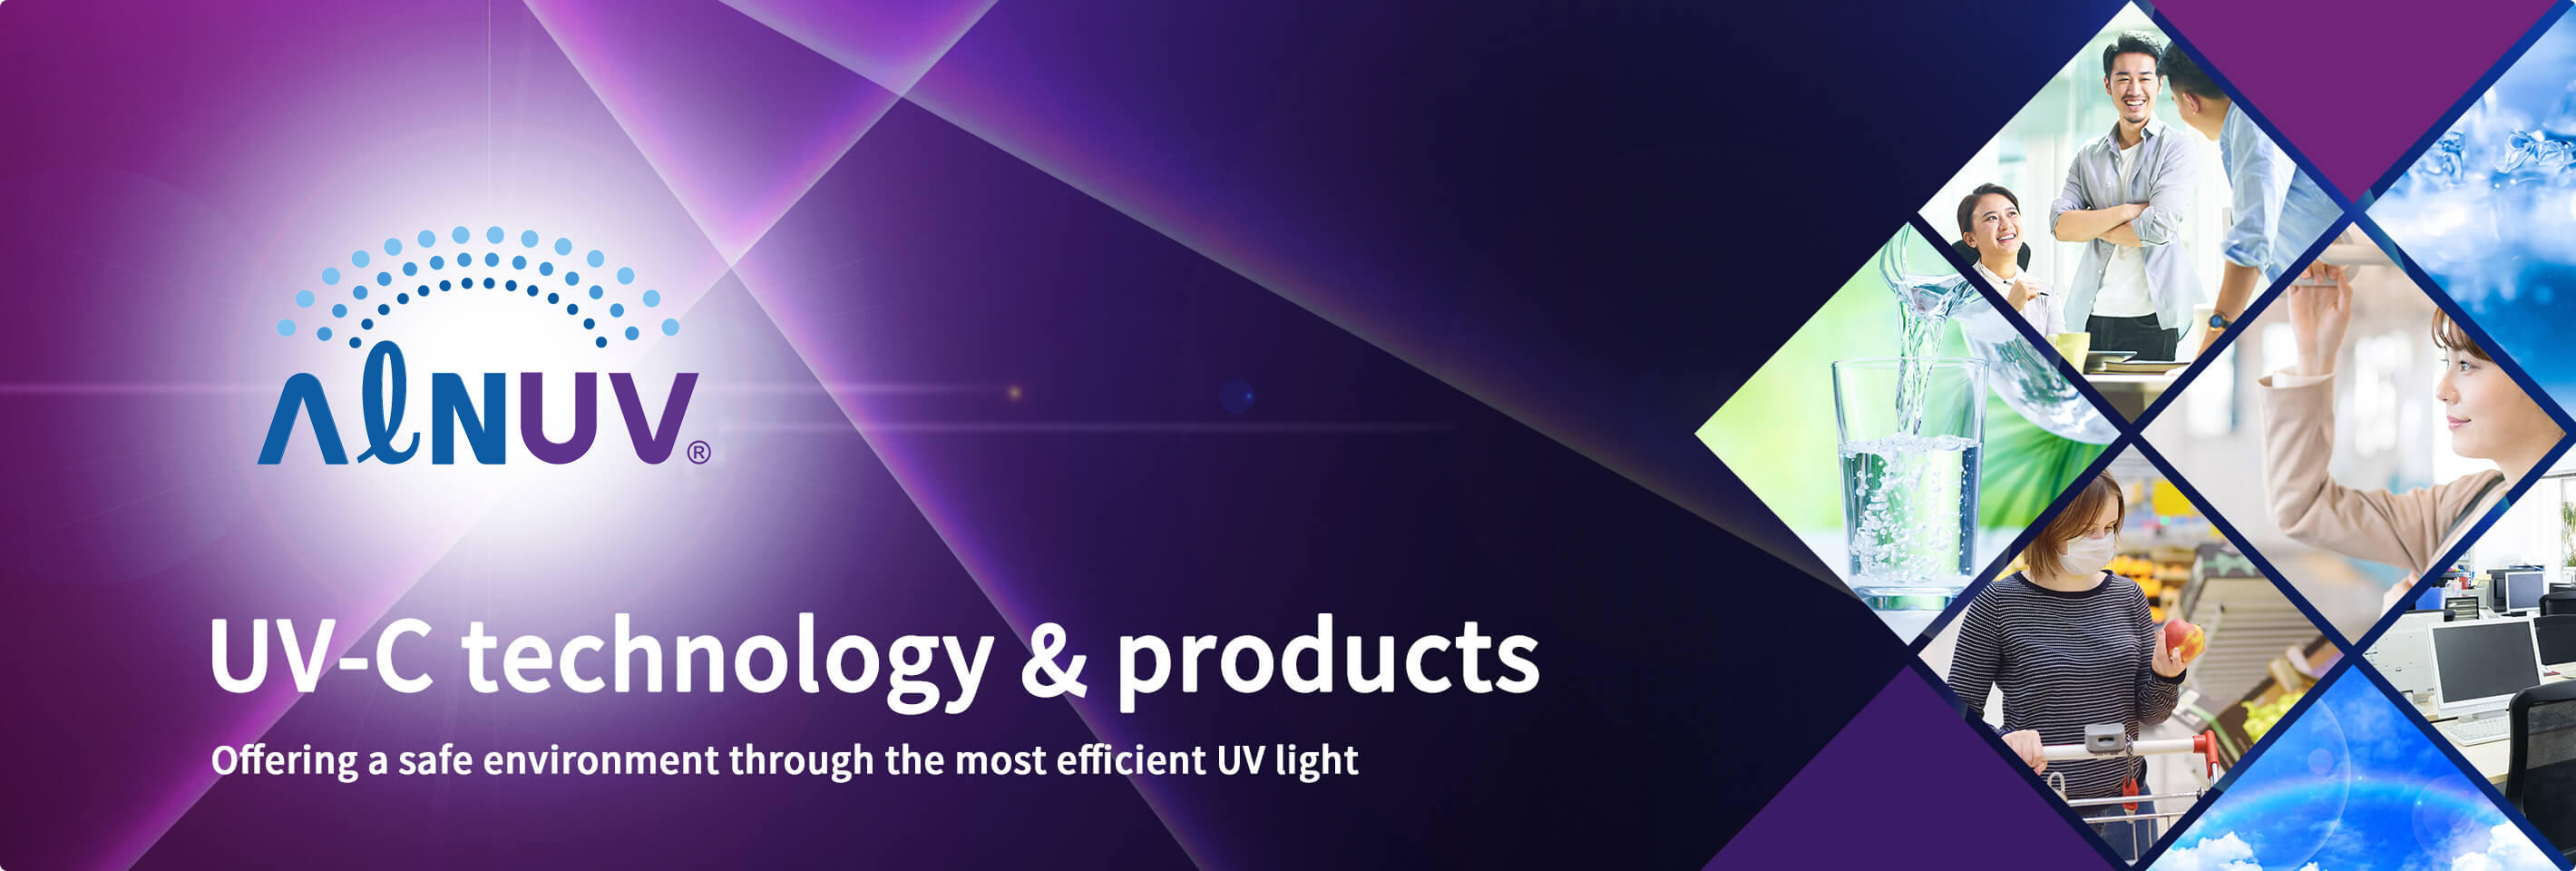 UV-C technology & products